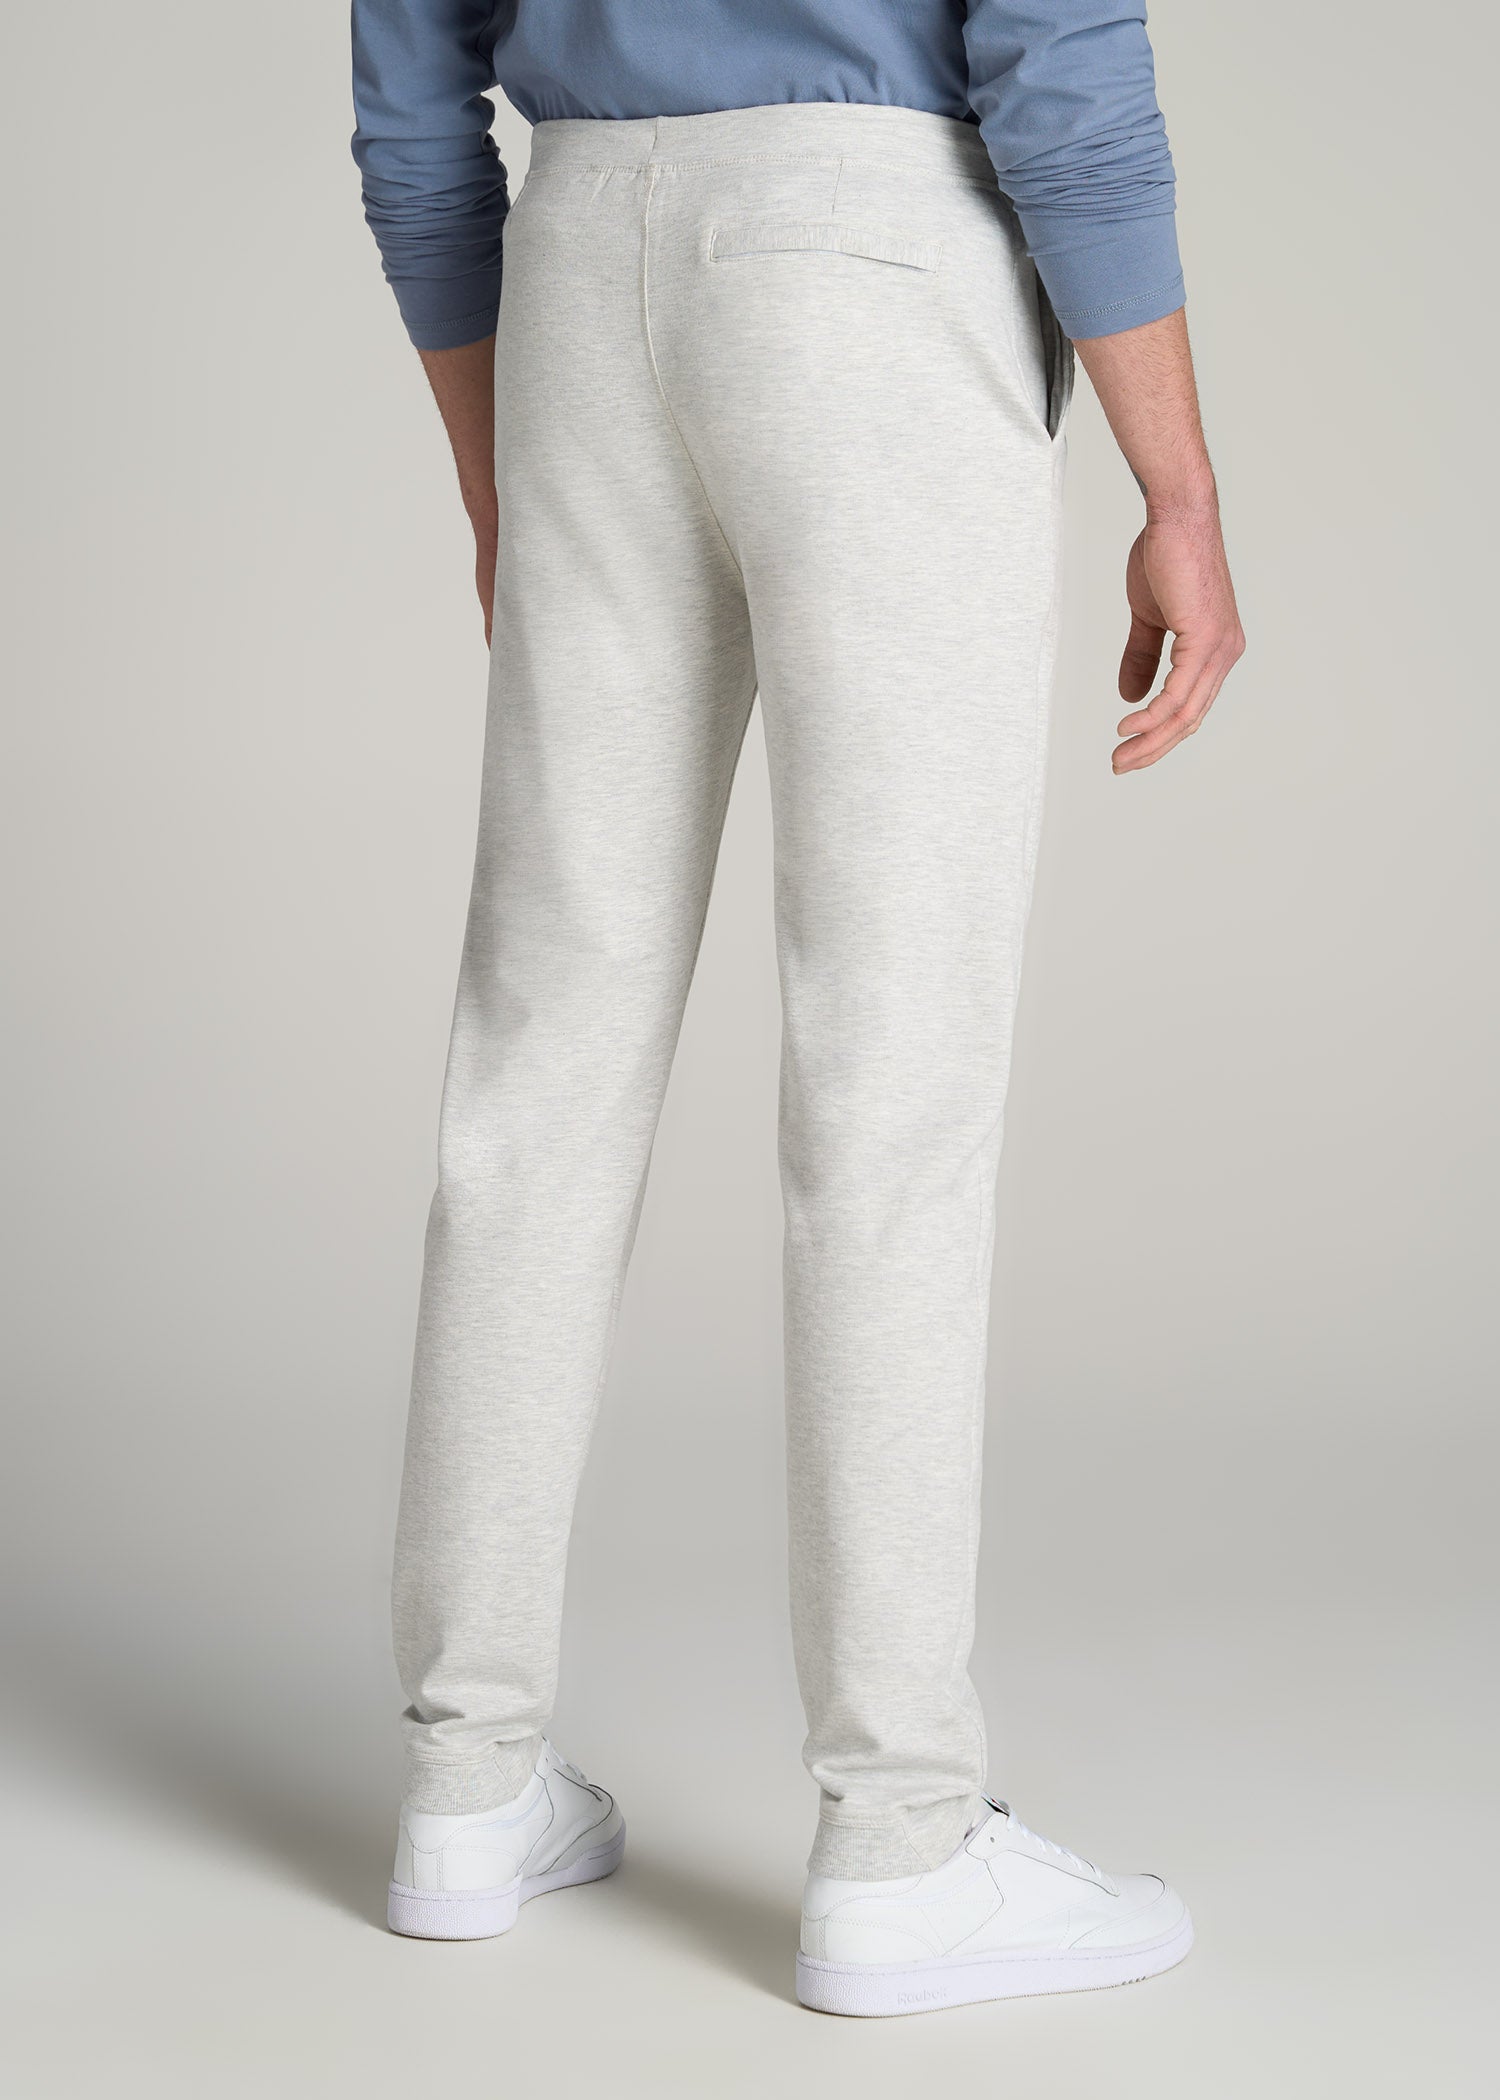        American-Tall-Men-Microsanded-French-Terry-Sweatpant-Grey-Mix-back